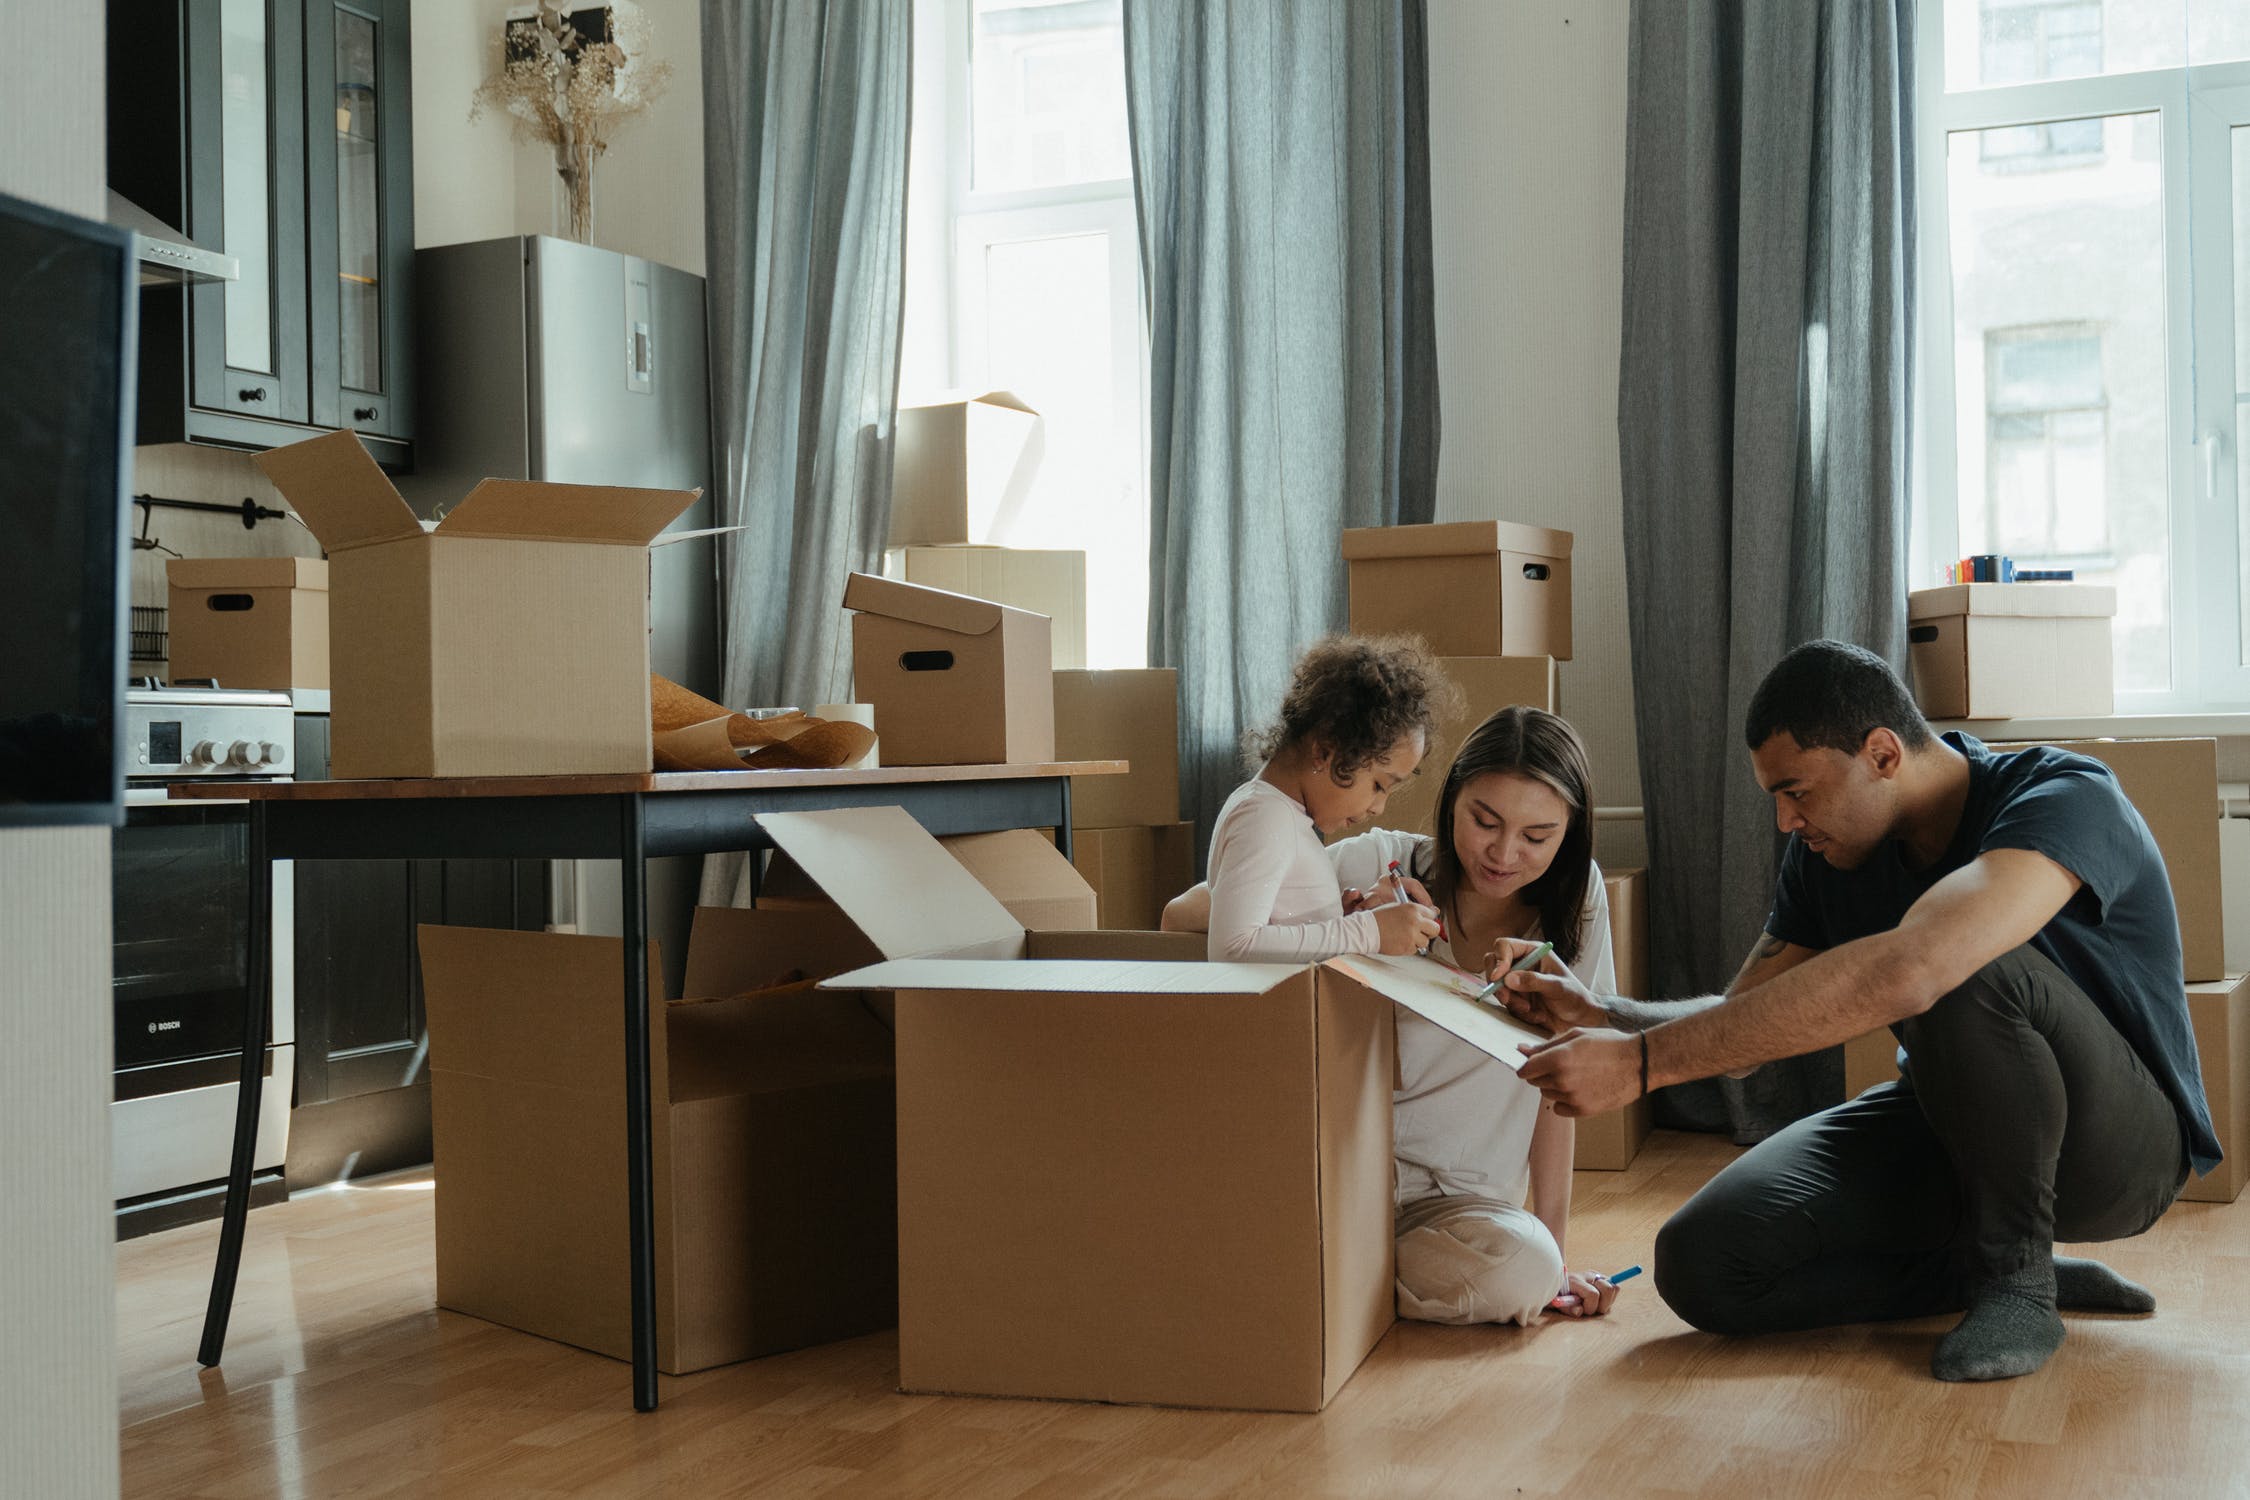 The Truth About Renters Insurance: How Much Do You Really Need?